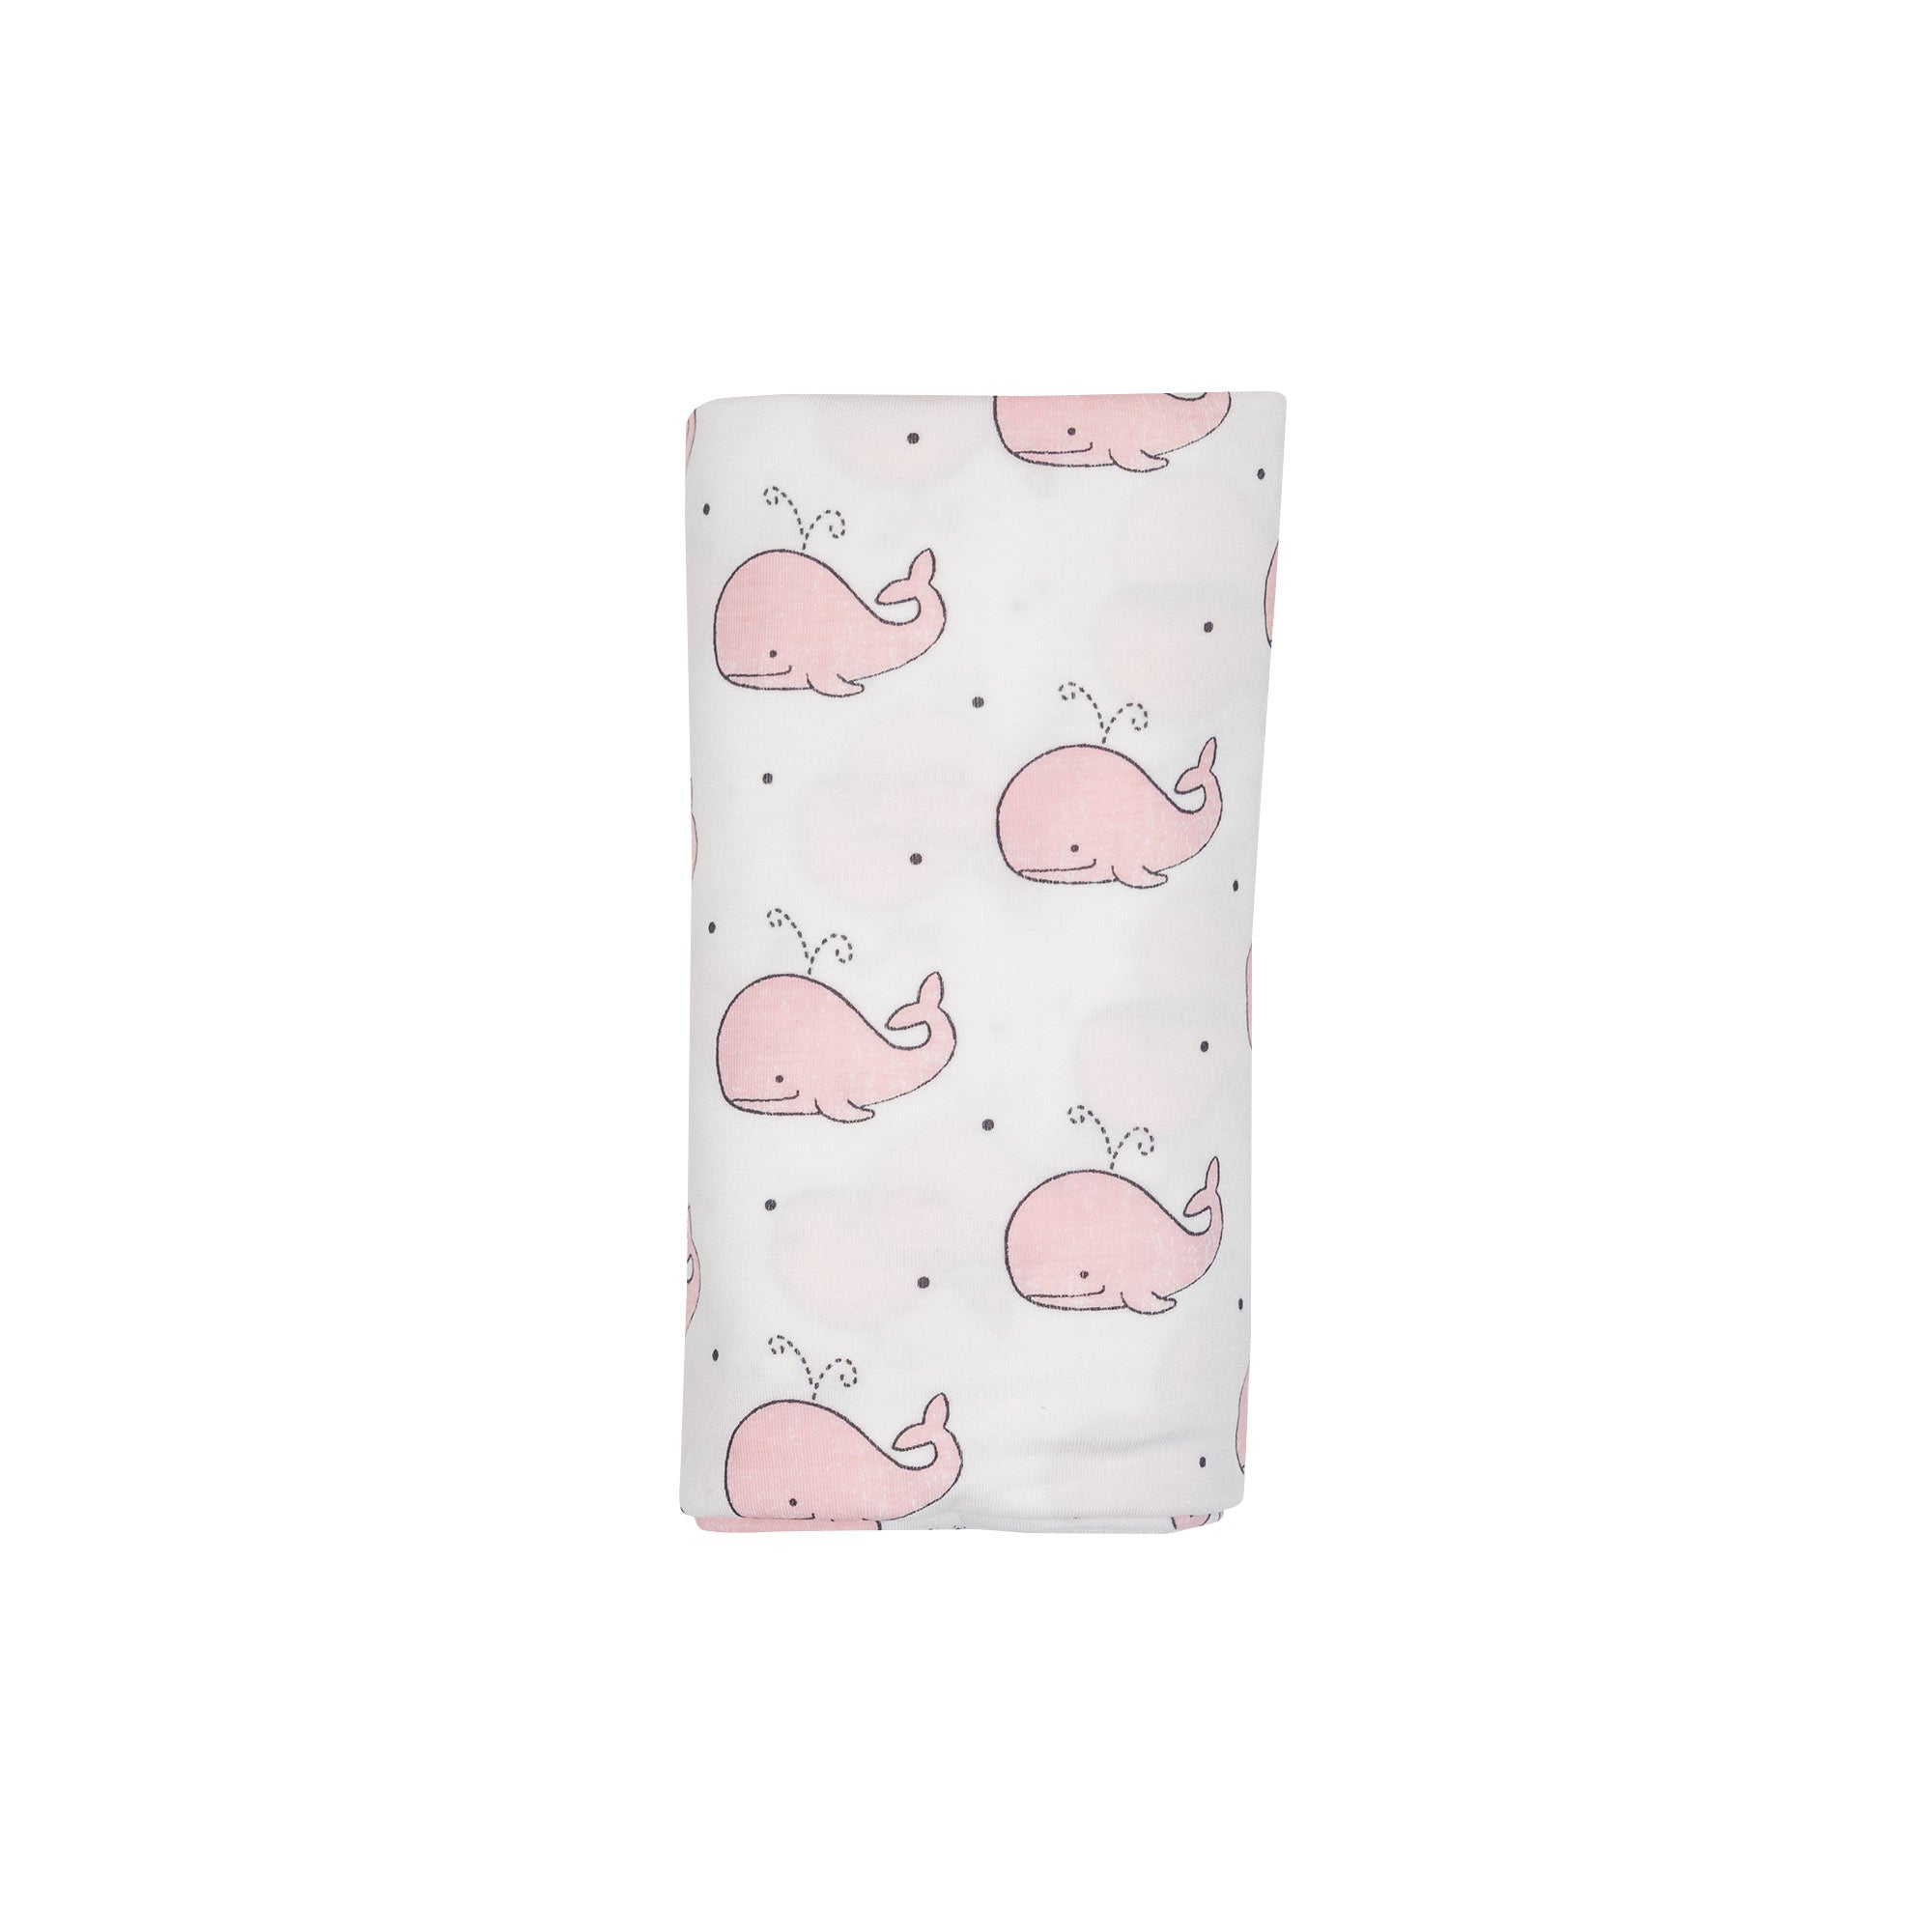 Swaddle Blanket - Bubbly Whale Pink